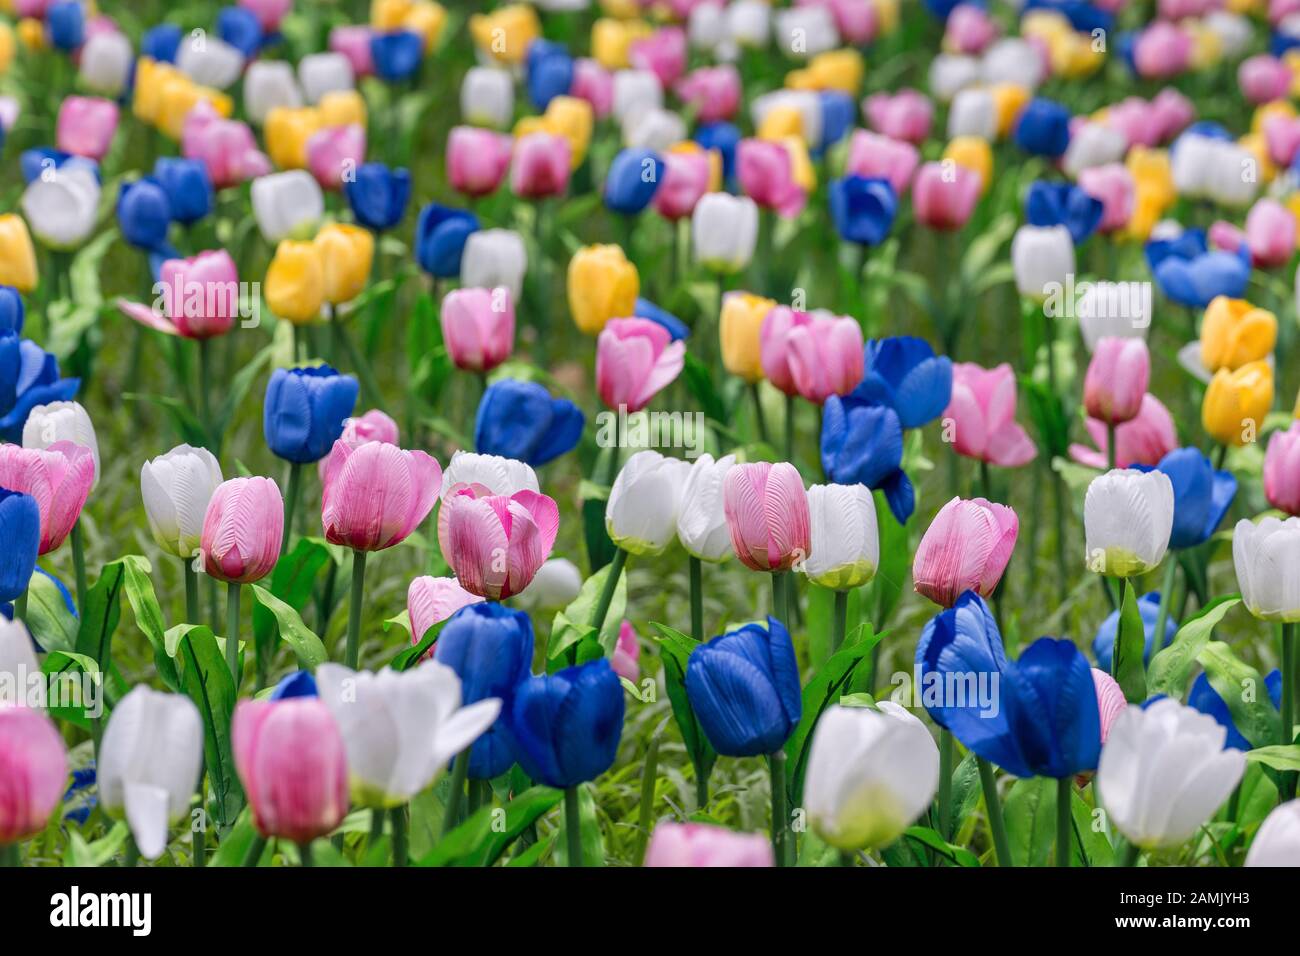 Field of artificial tulips of different colors Stock Photo